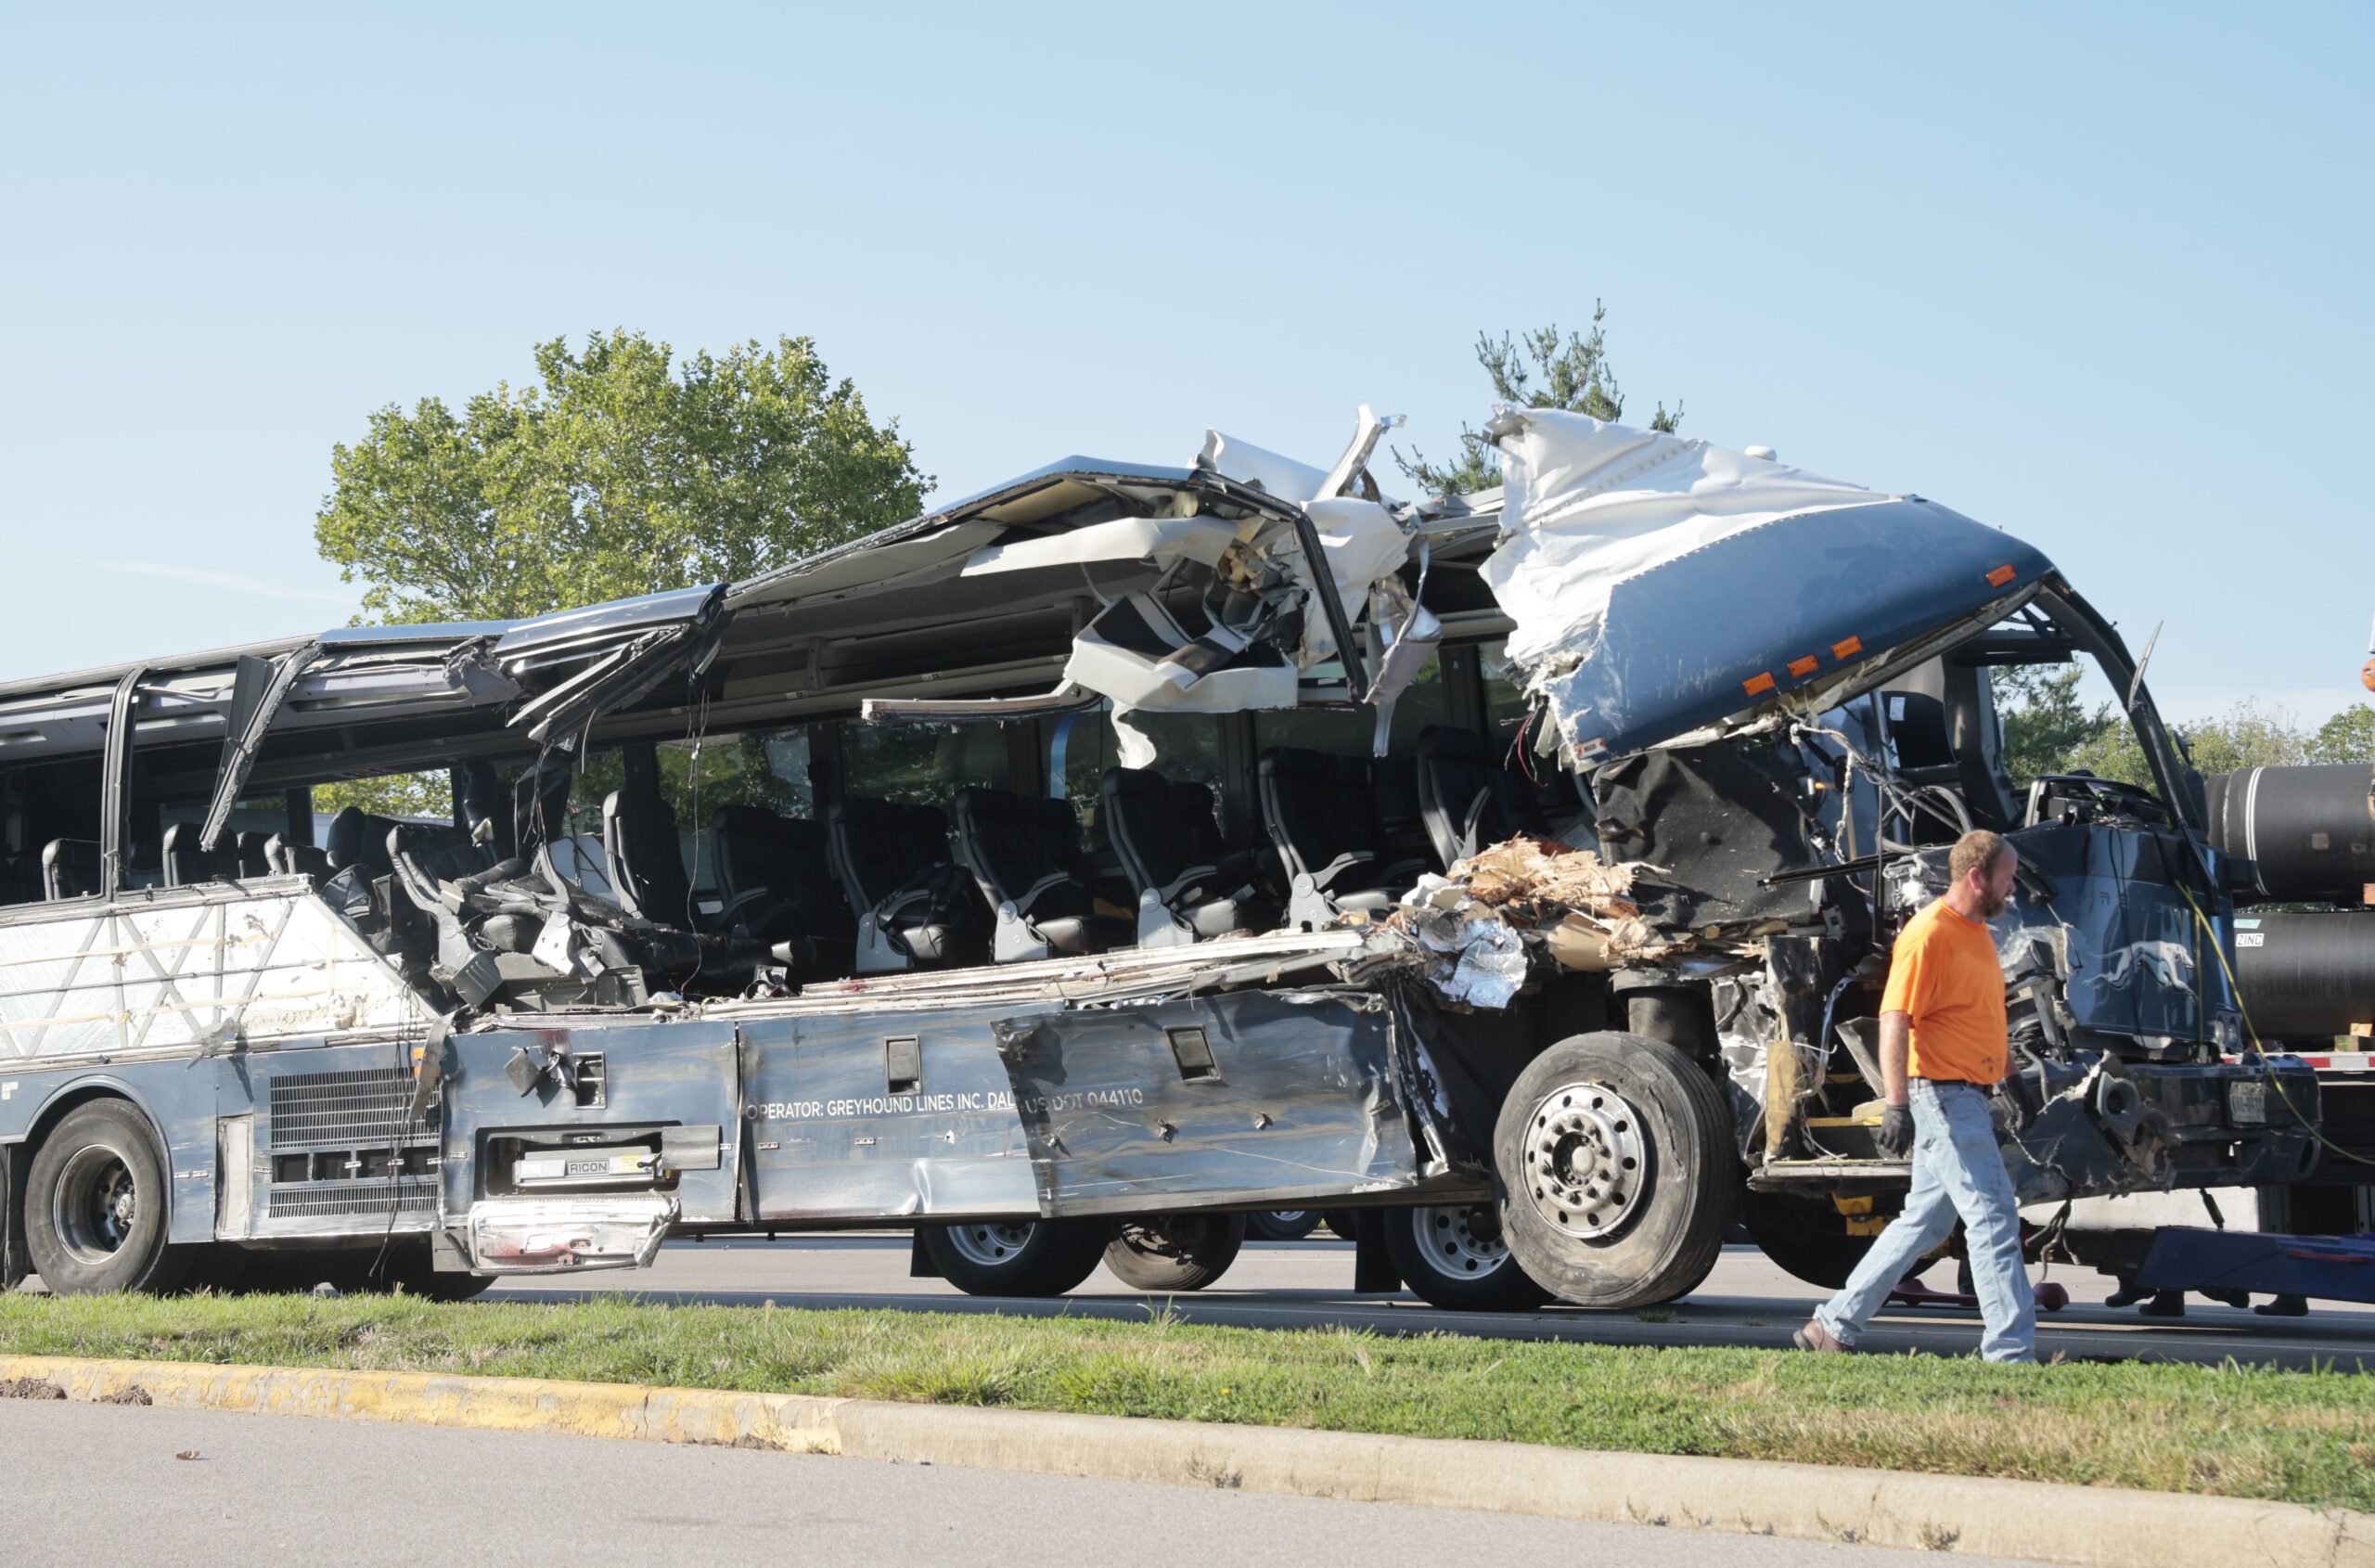 A worker helps clear the wreckage of a Greyhound bus that collided with tractor-trailers on the exi...